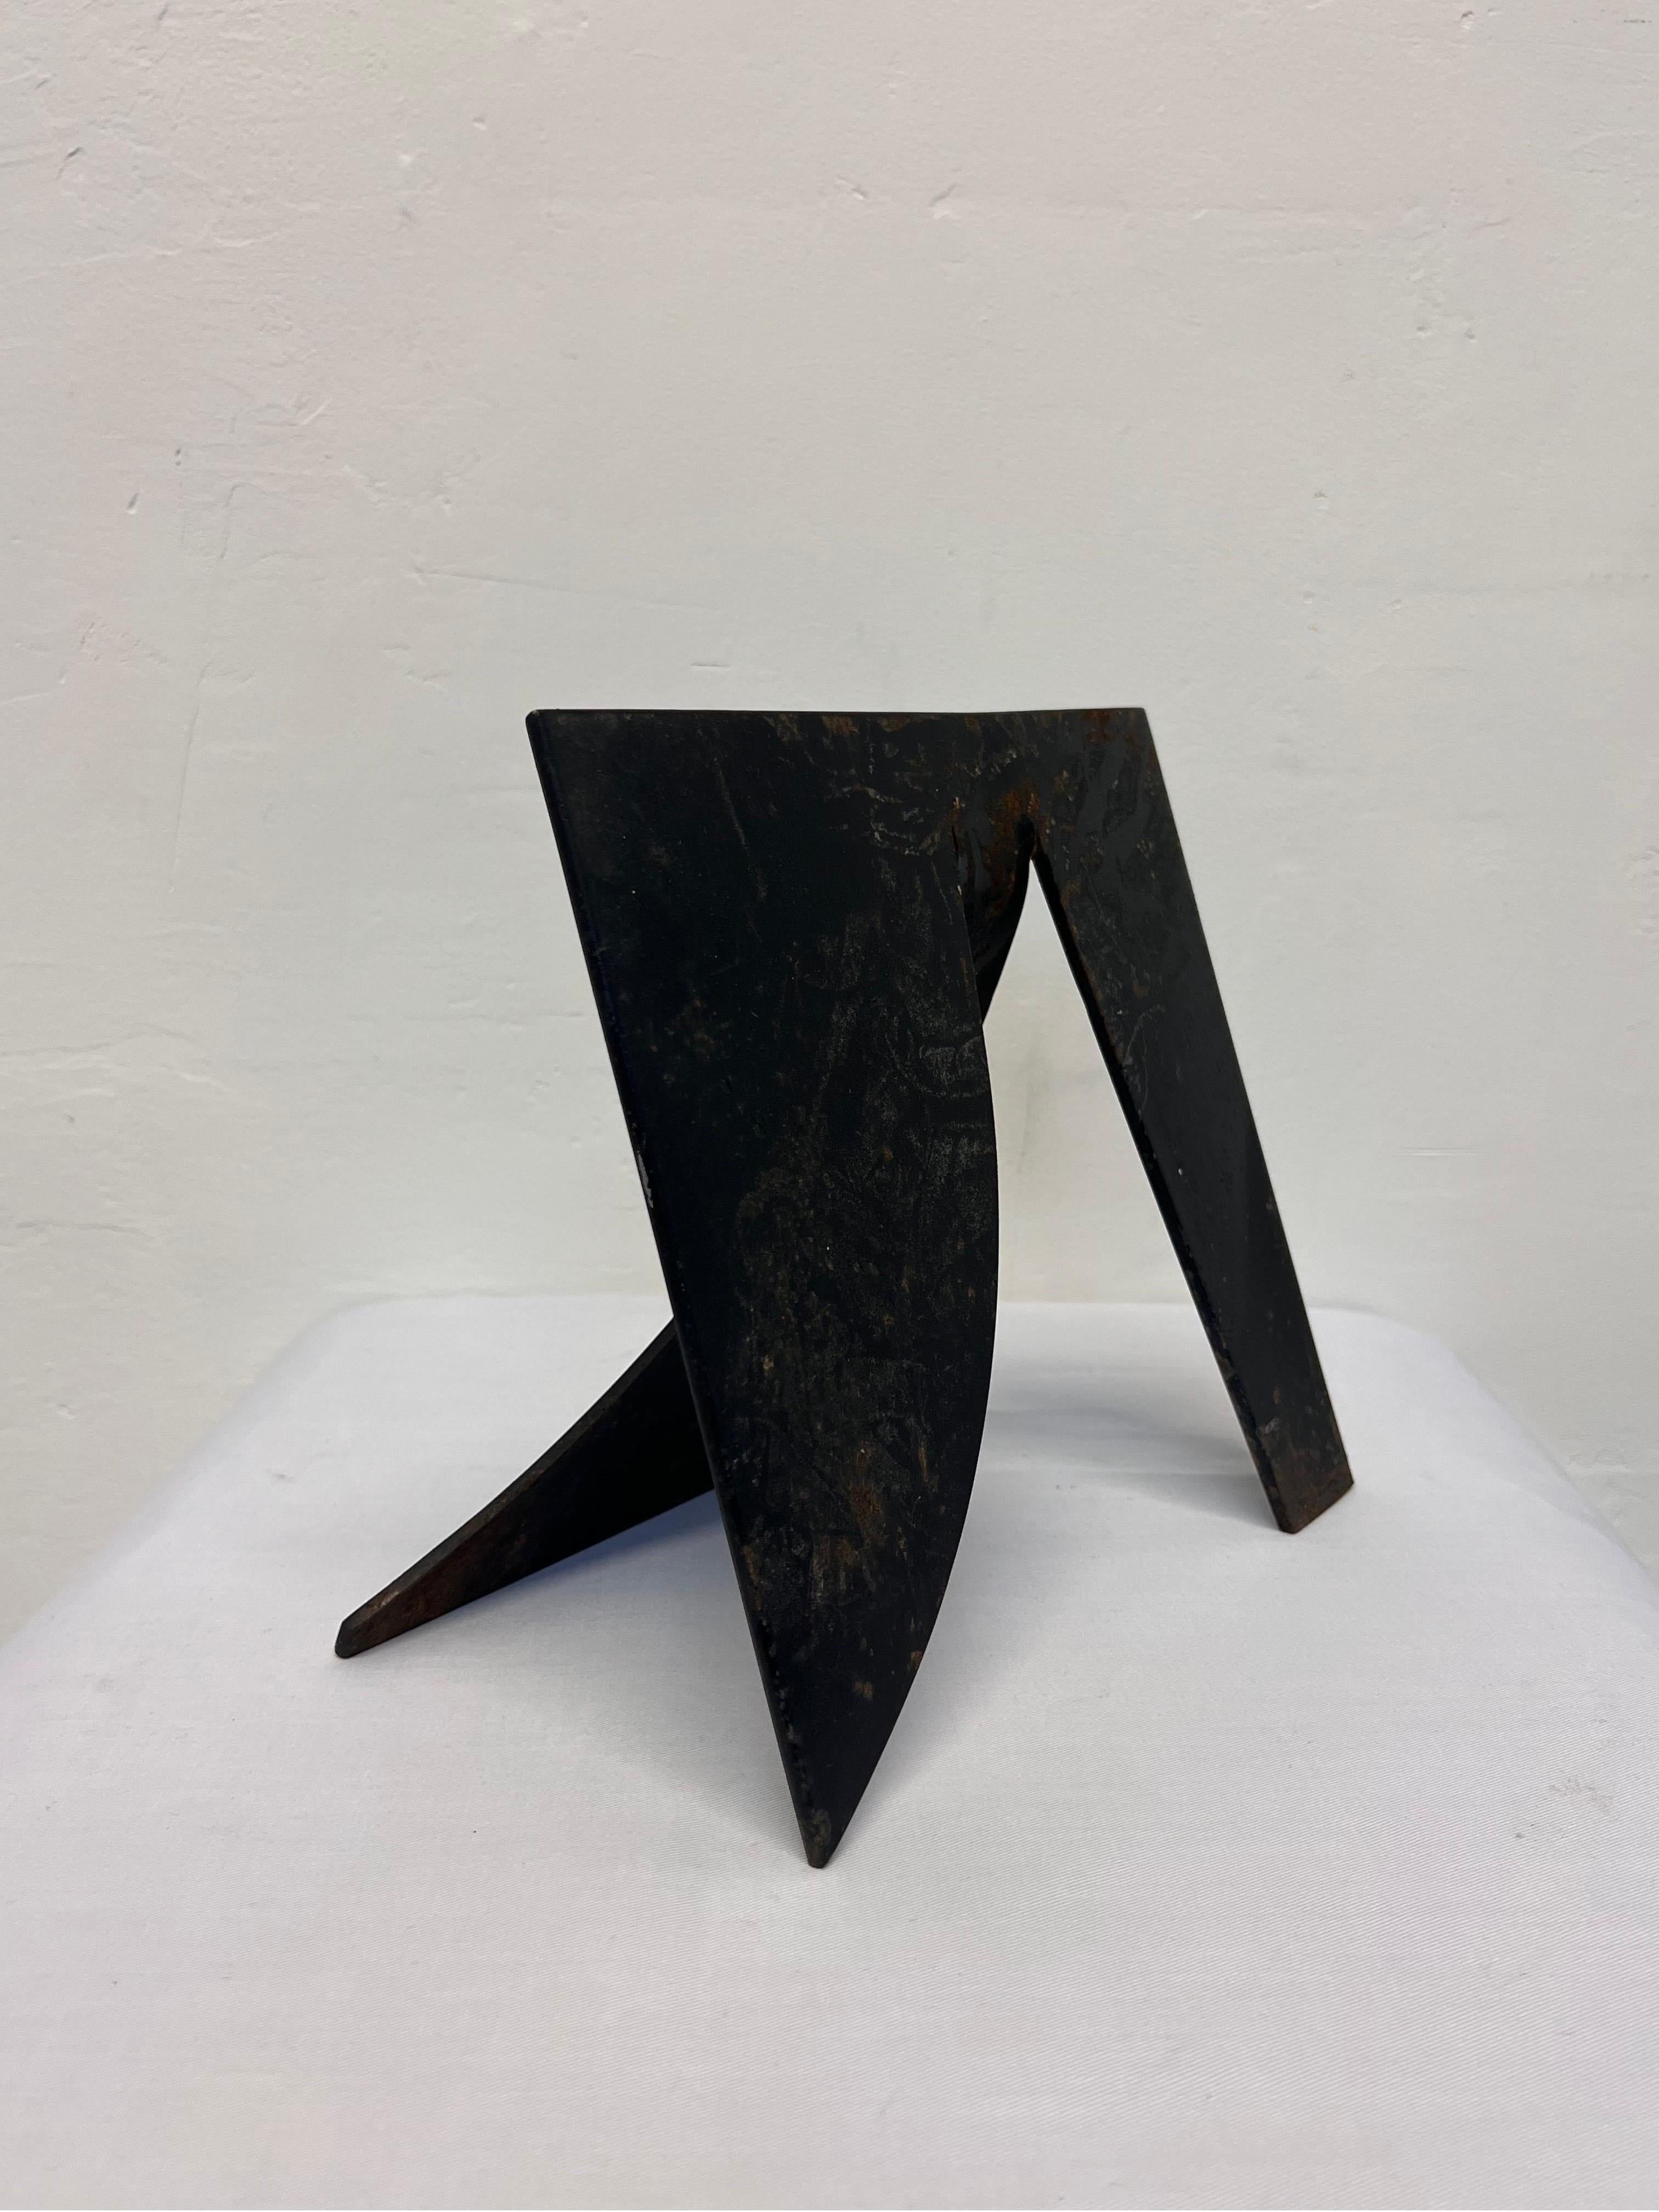 Brazilian Modern Black Steel Abstract Table Sculpture, 1980s In Distressed Condition For Sale In Miami, FL